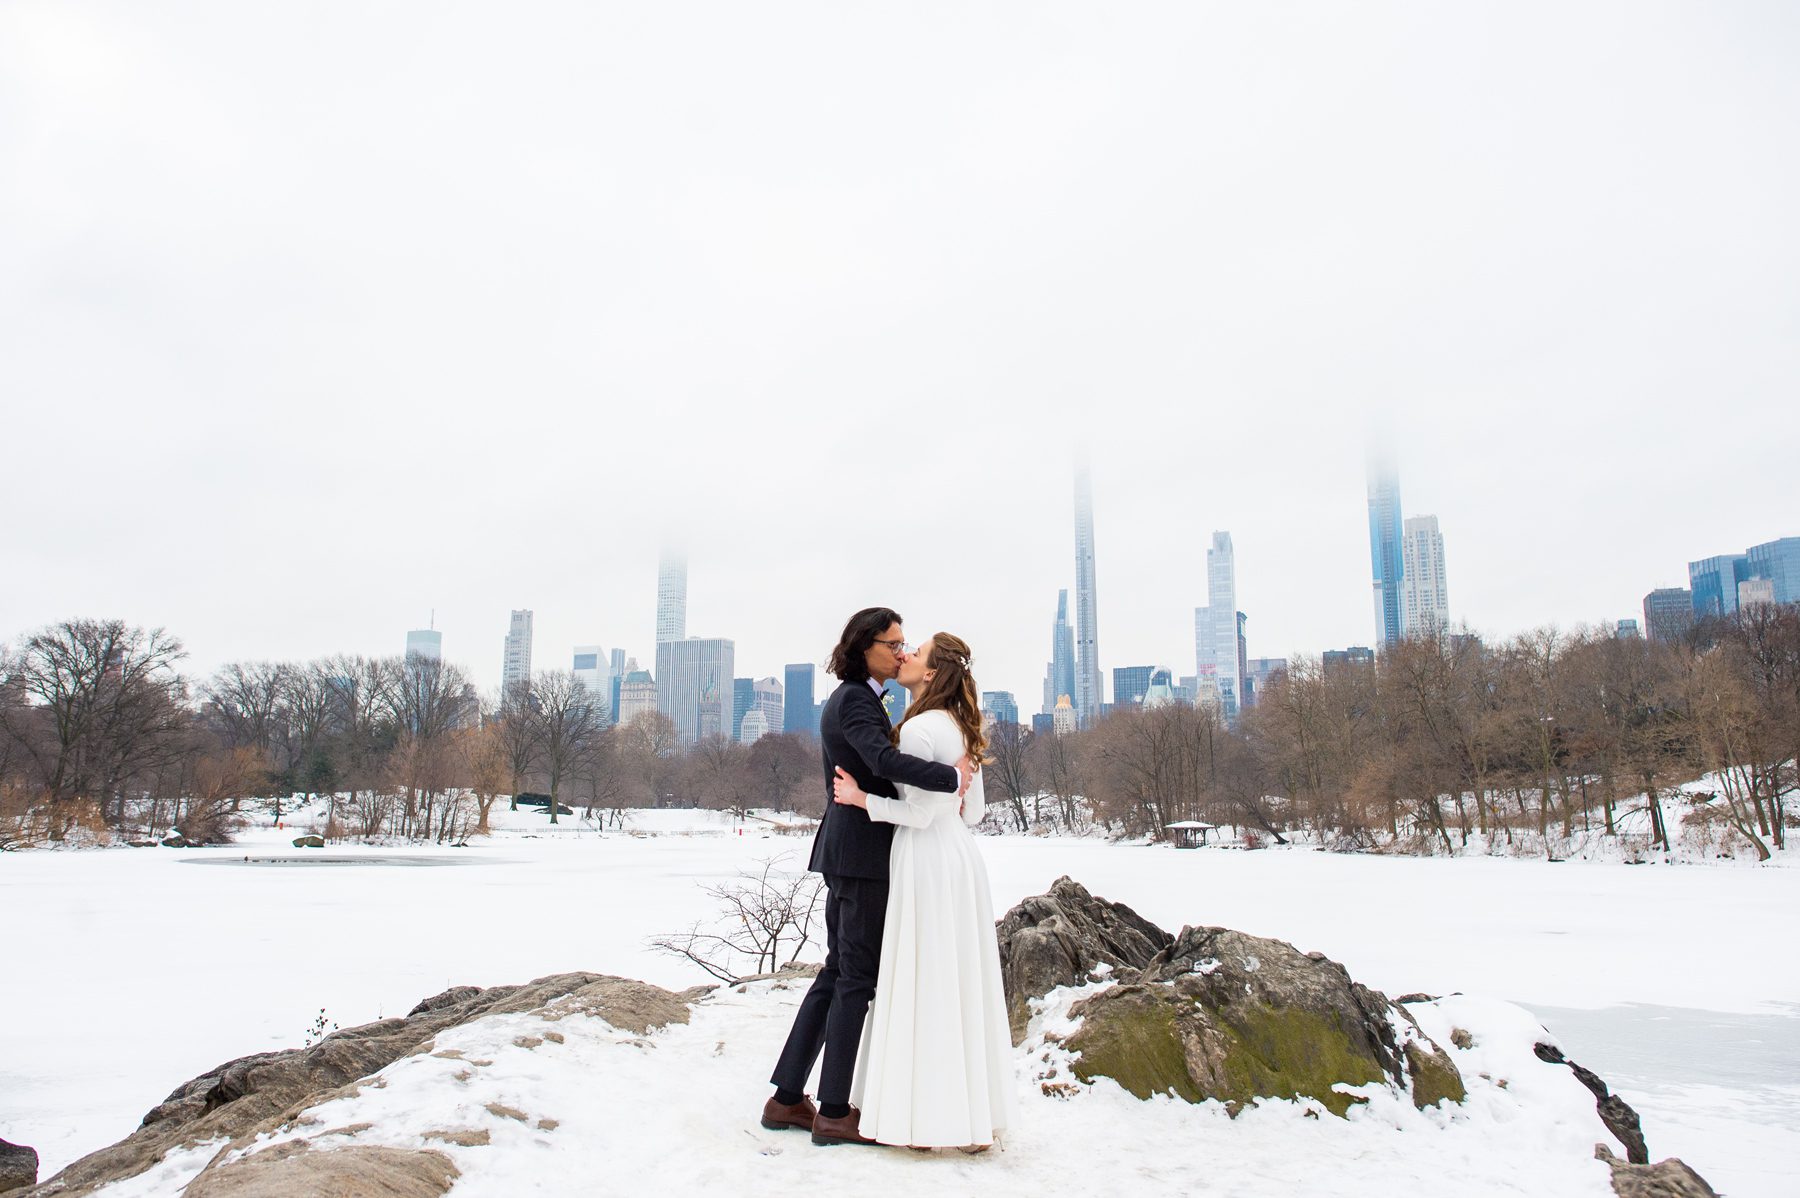 Winter Elopement in Central Park